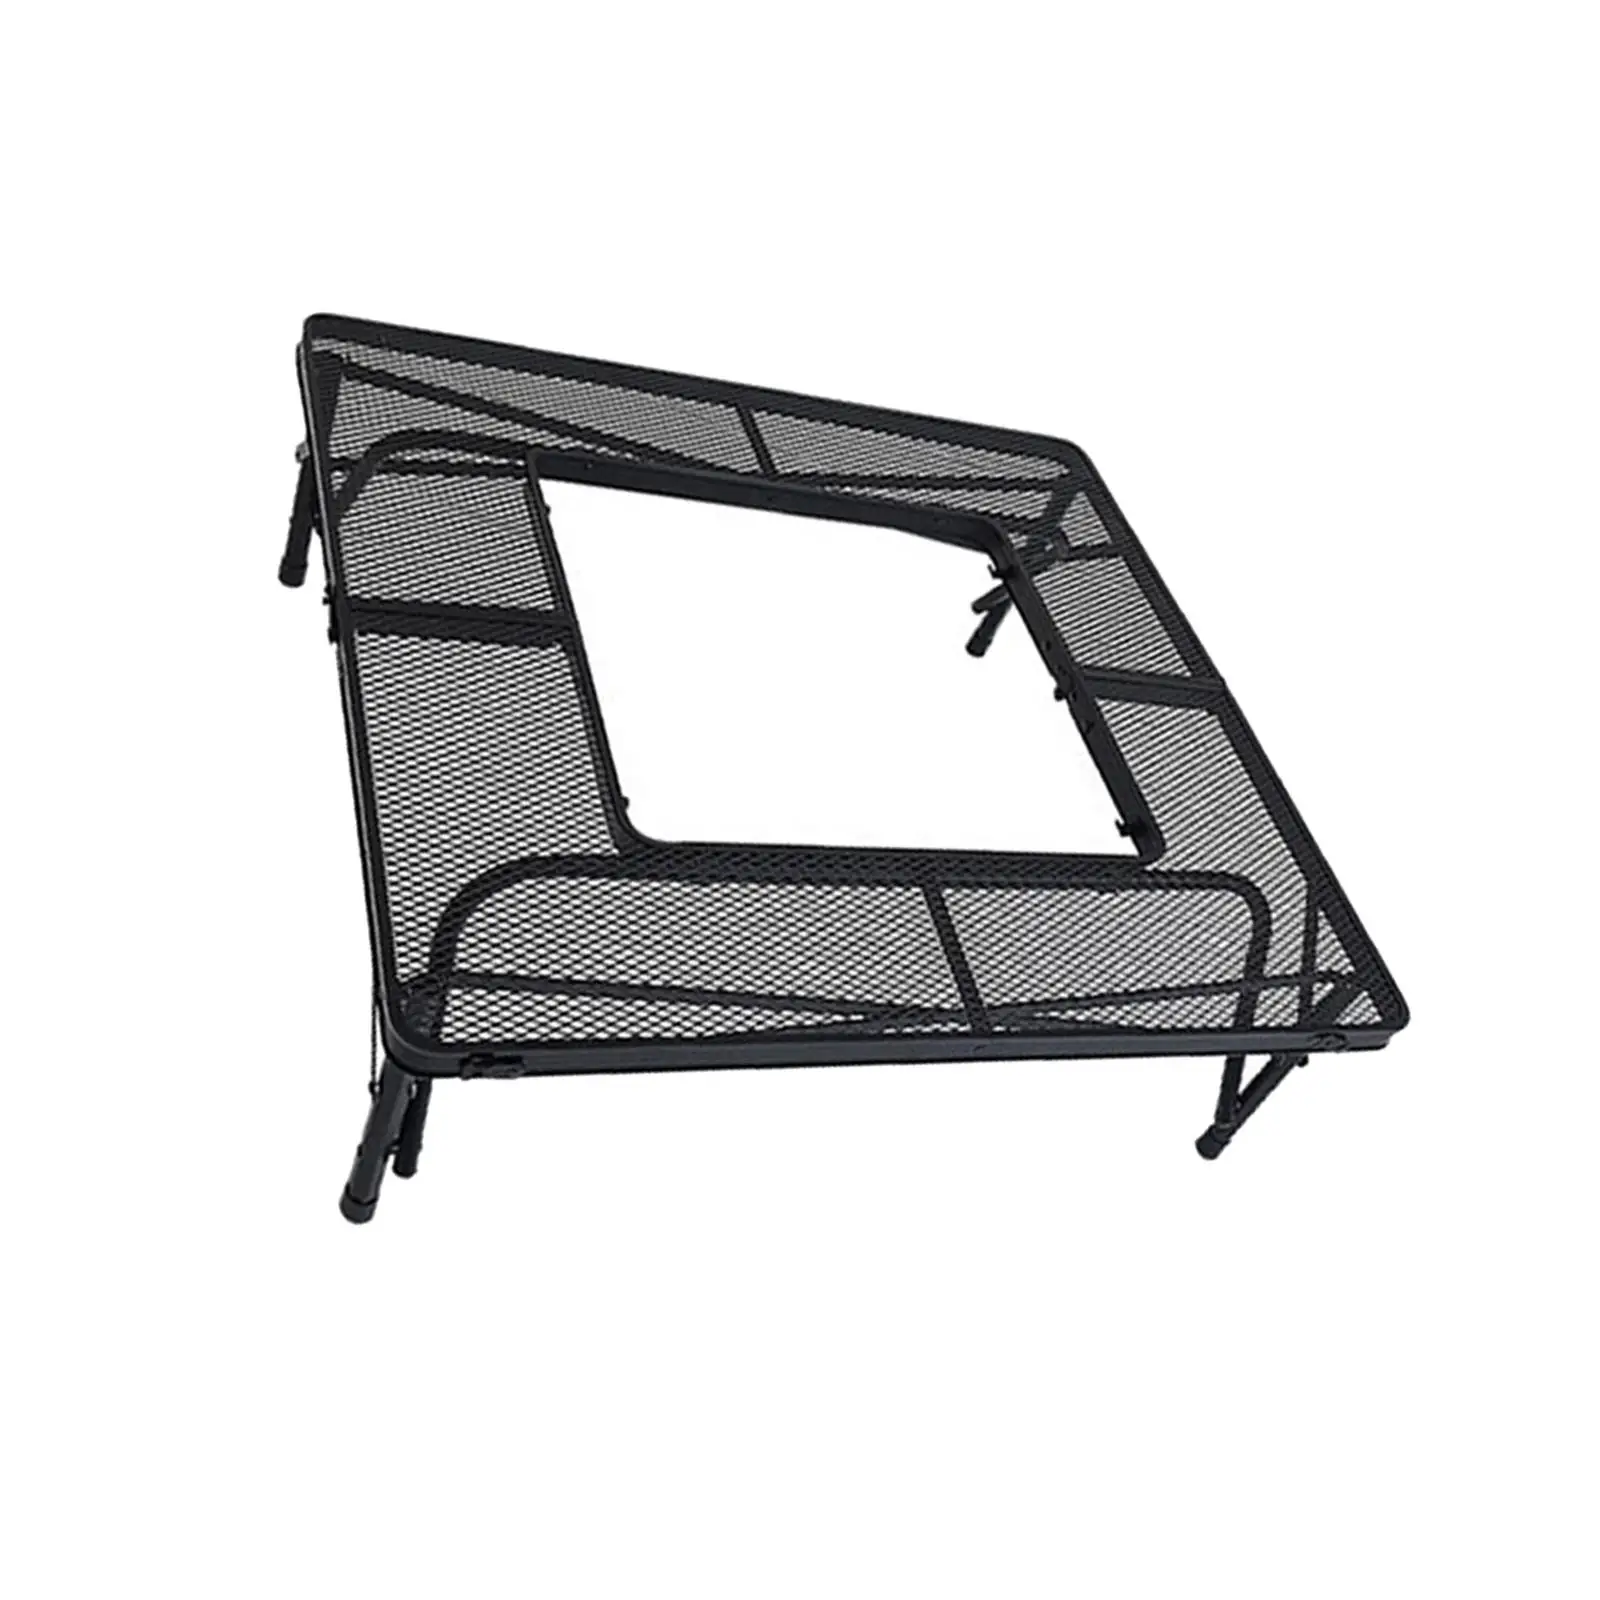 Outdoor Folding Table Lightweight Food Grill Desk Picnic Table Aluminum Alloy Portable Grill Mesh Rack for Garden BBQ Party